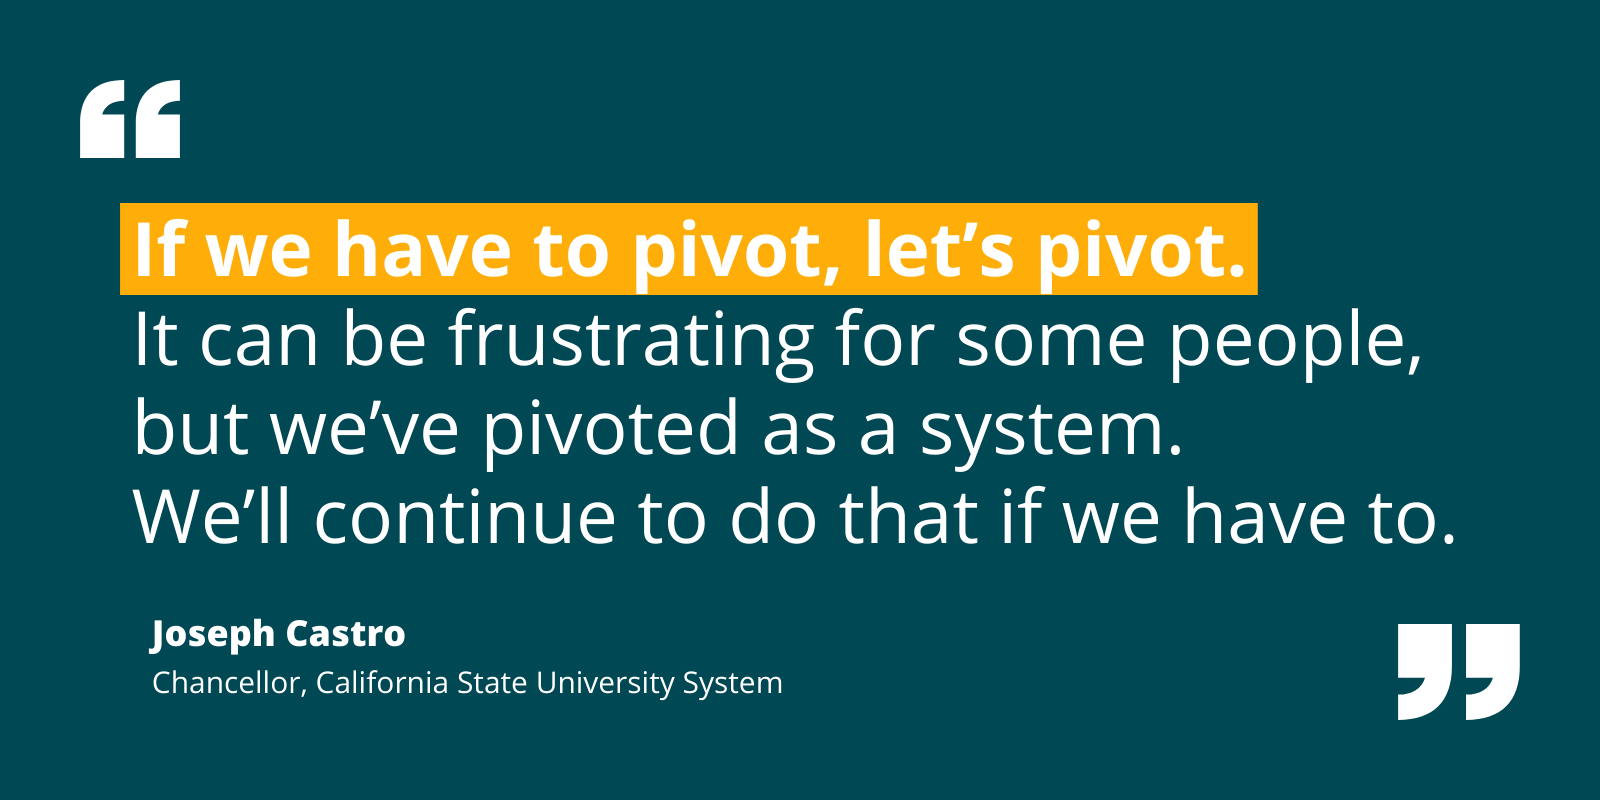 Quote by Joseph Castro re: his willingness to pivot on a system-wide scale if necessary for adapting CSU policy.